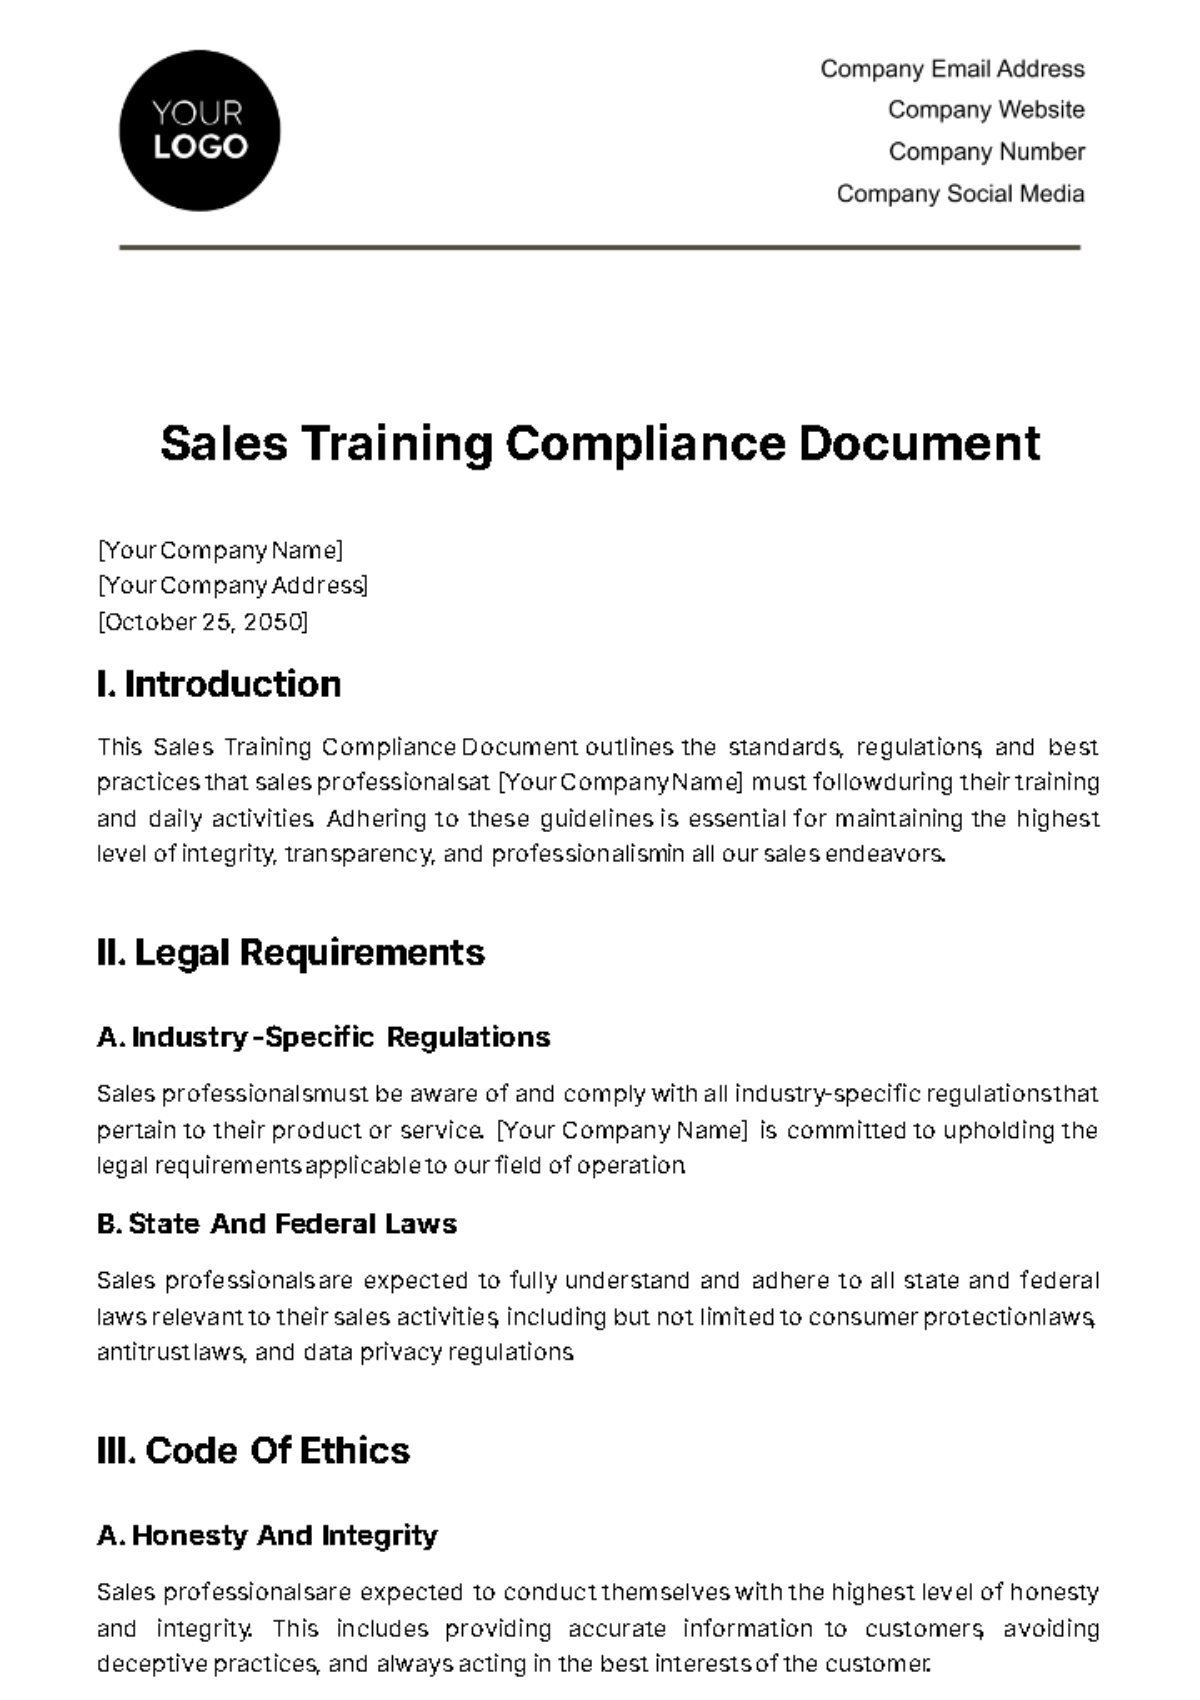 Sales Training Compliance Document Template